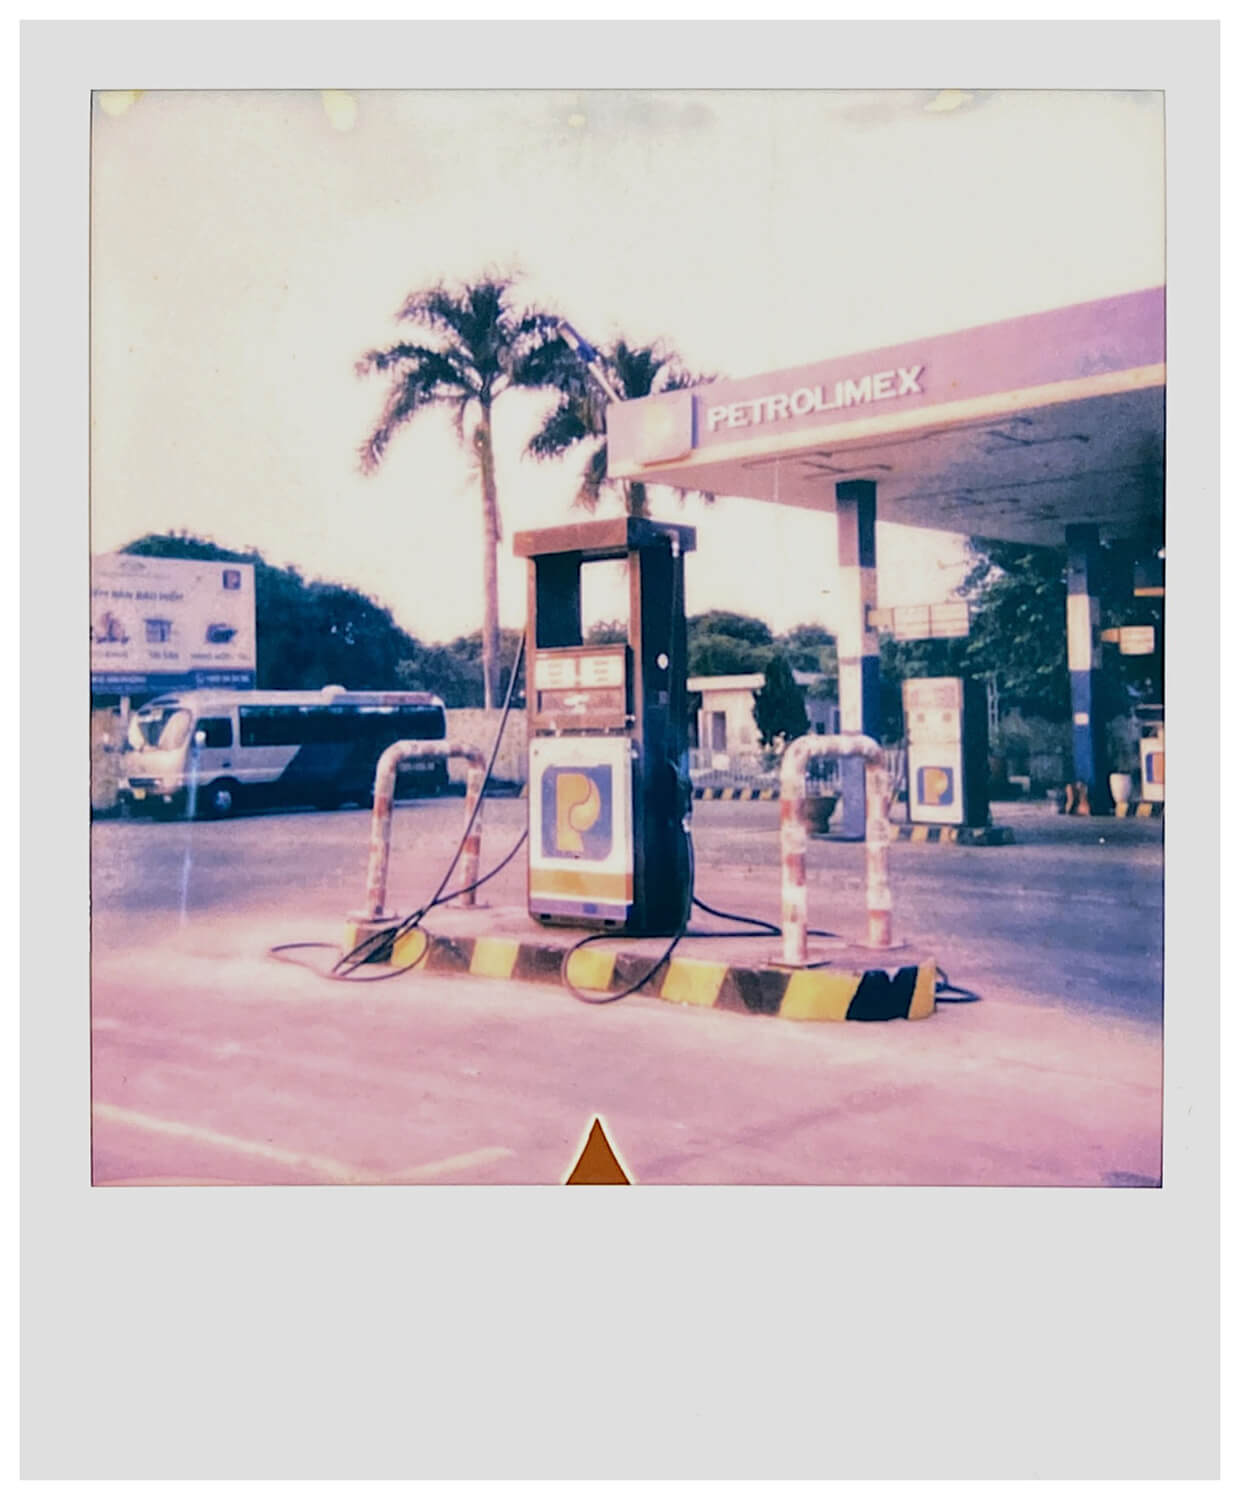 A Polaroid photo of a gas station during a sunny day, slightly over-exposed and shot using a Polaroid 636 talking camera.